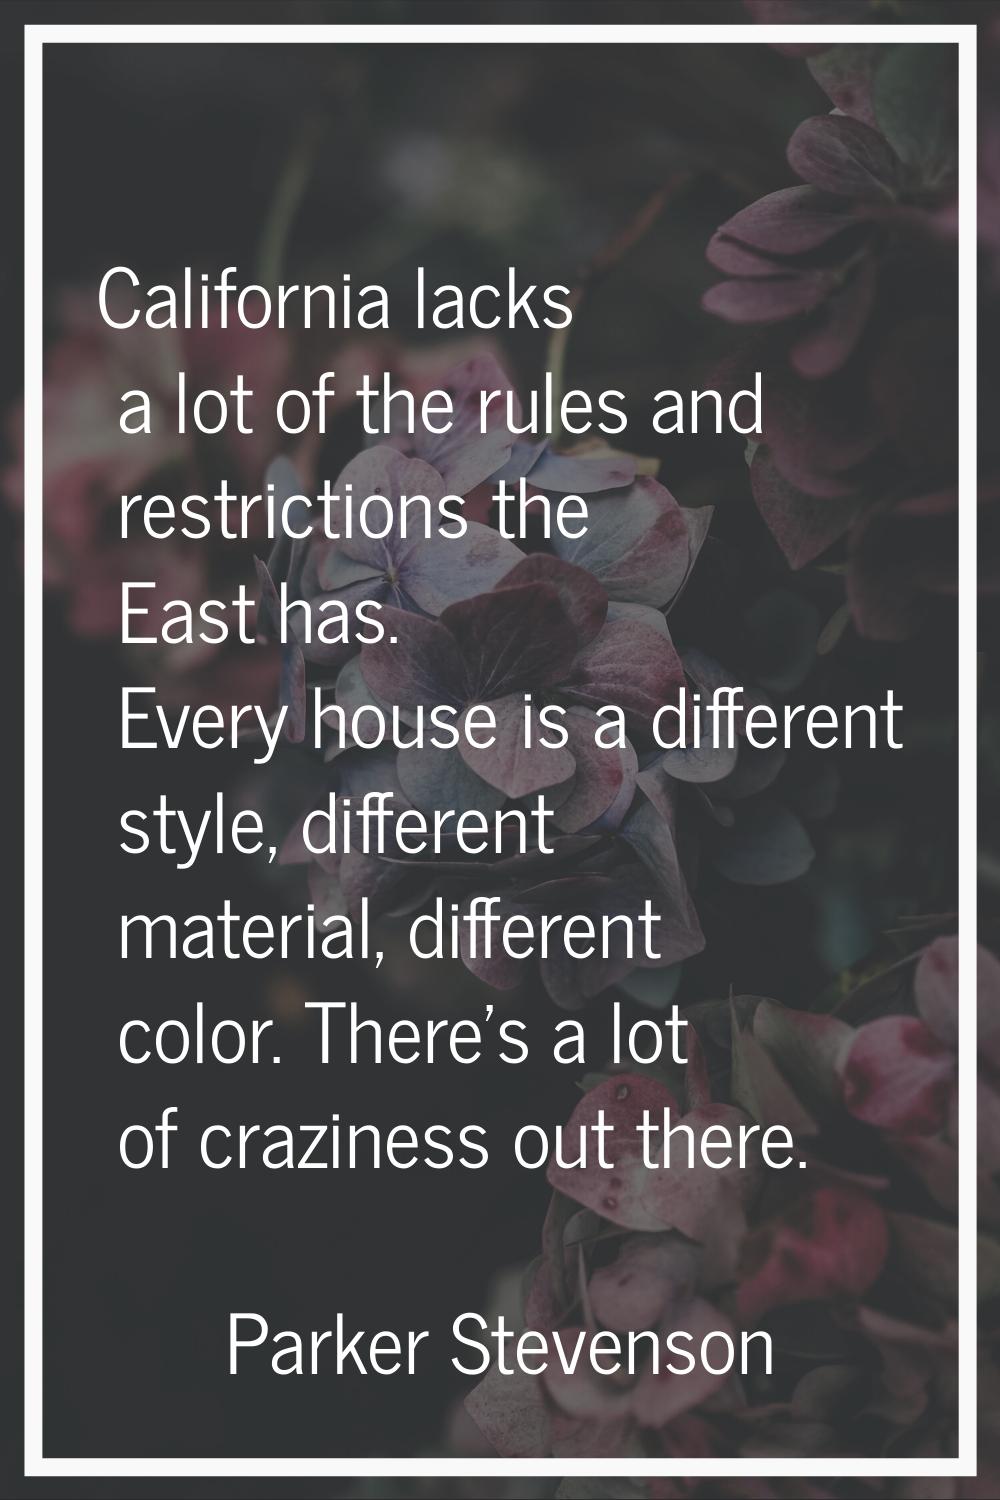 California lacks a lot of the rules and restrictions the East has. Every house is a different style